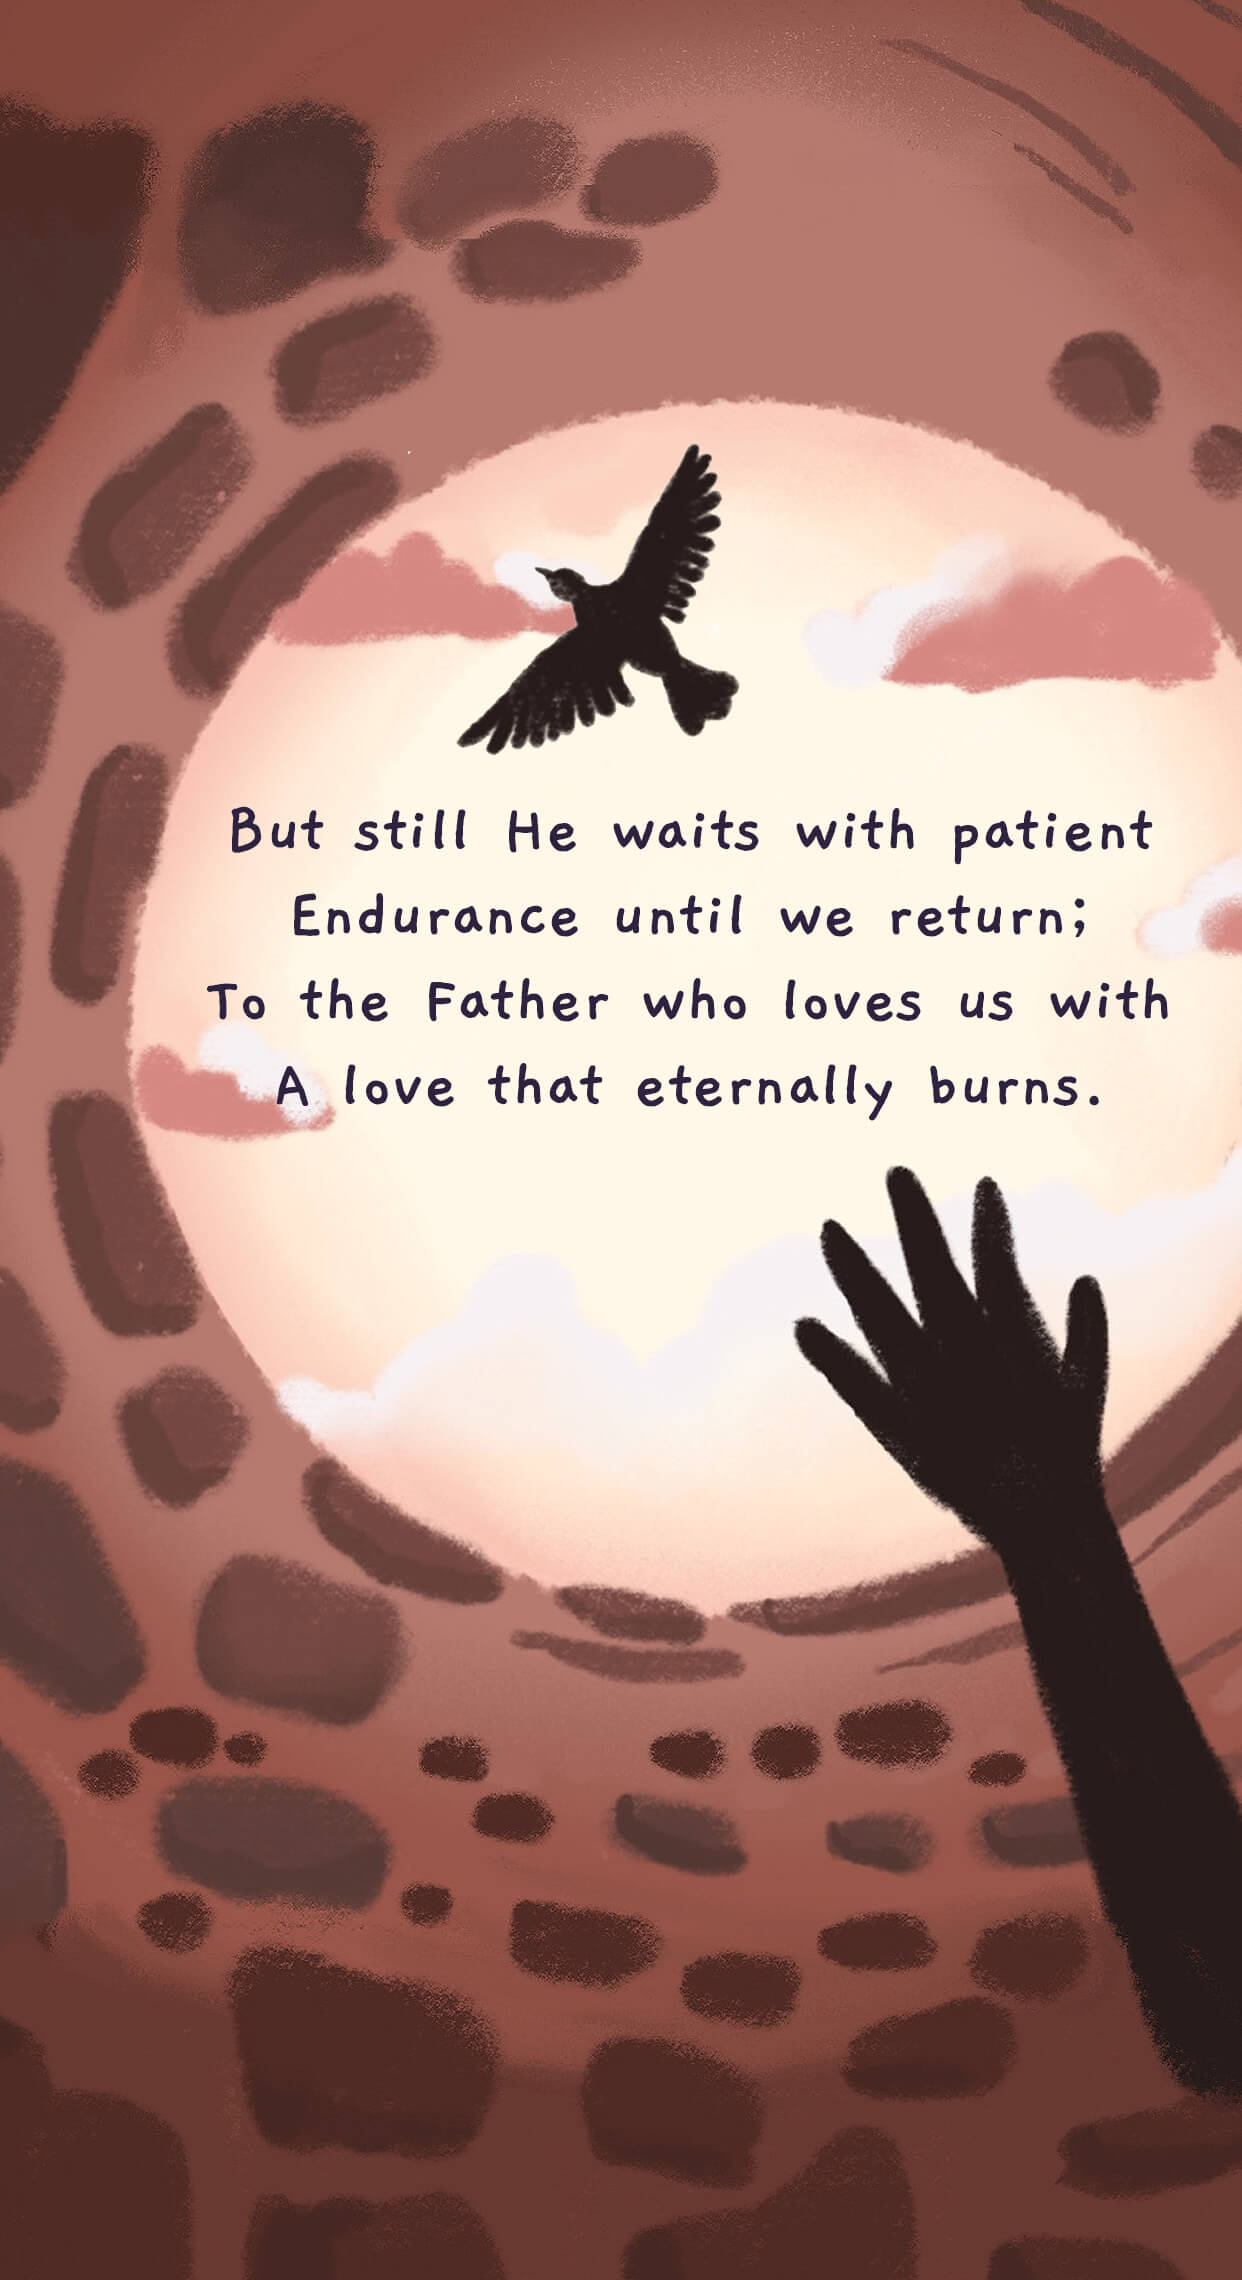 But still He waits with patient endurance until we return; To the Father who loves us with a love that eternally burns.